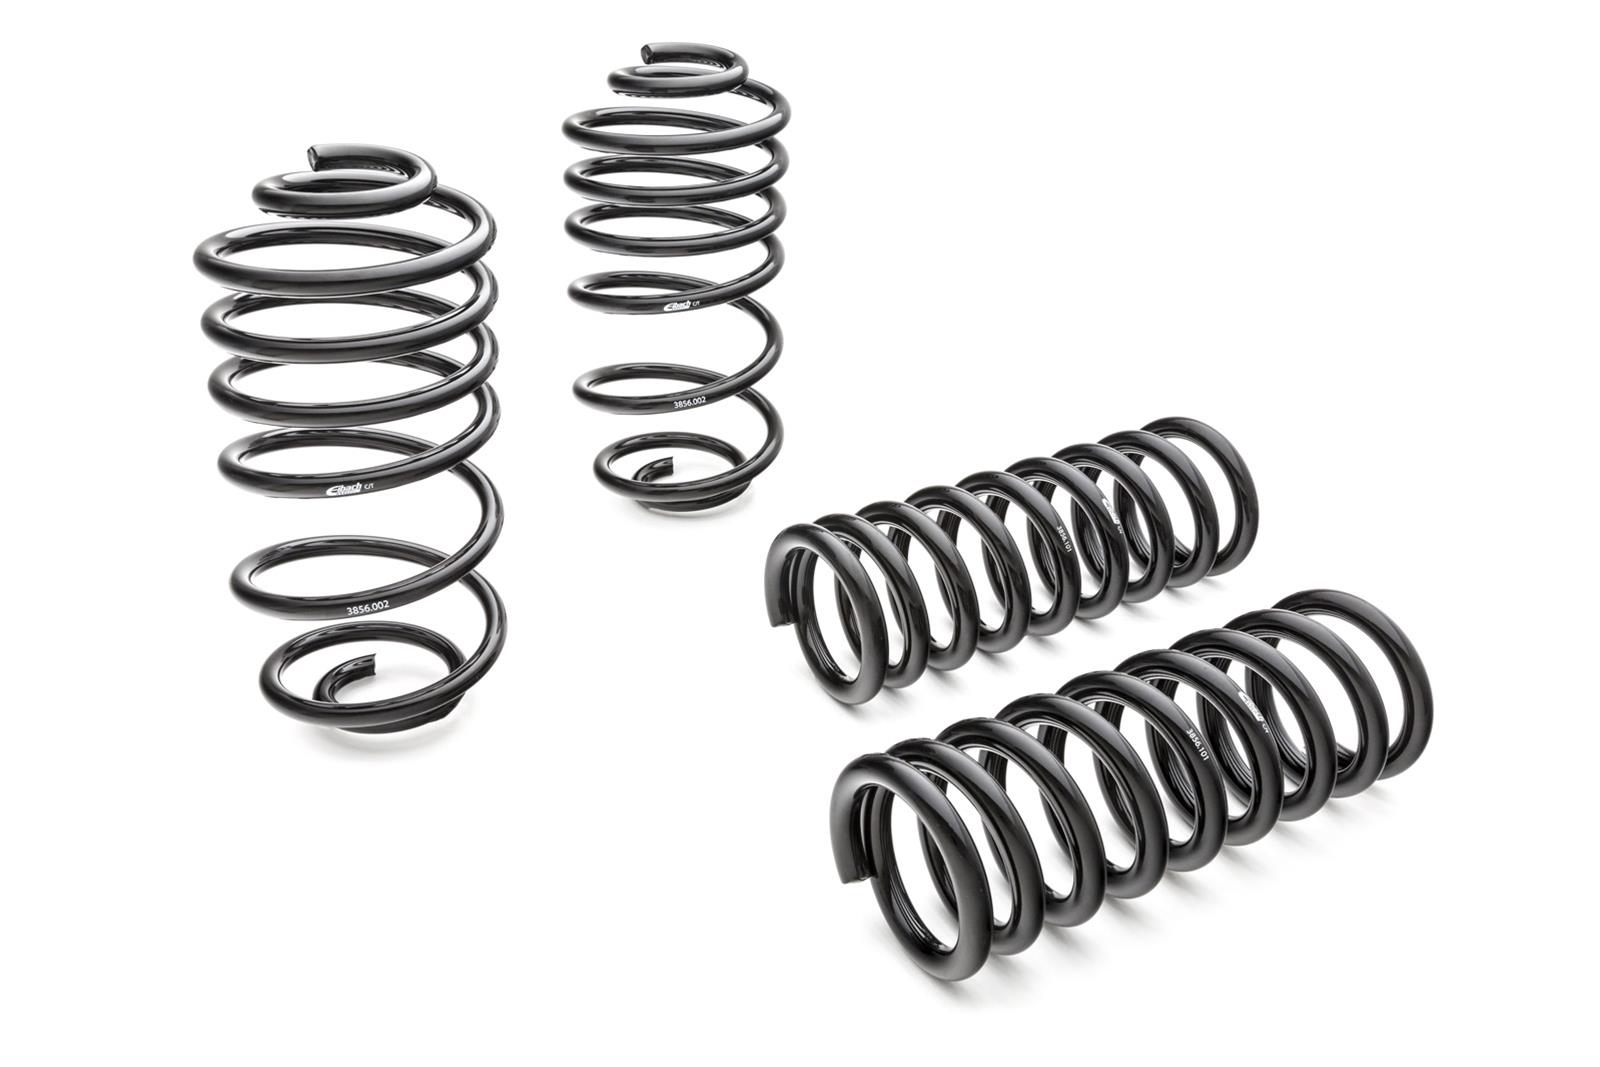 Details about   Eibach Pro-Kit springs for Audi A4 E10-15-003-06-22 Lowering kit